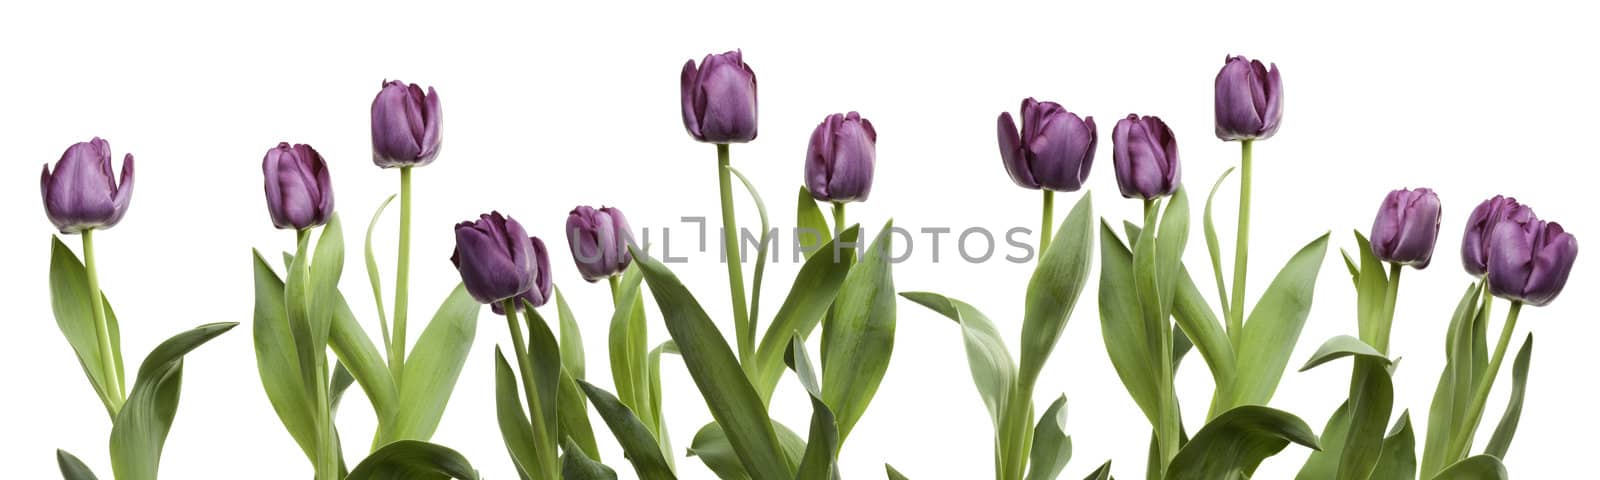 Row of Purple Tulips by Feverpitched